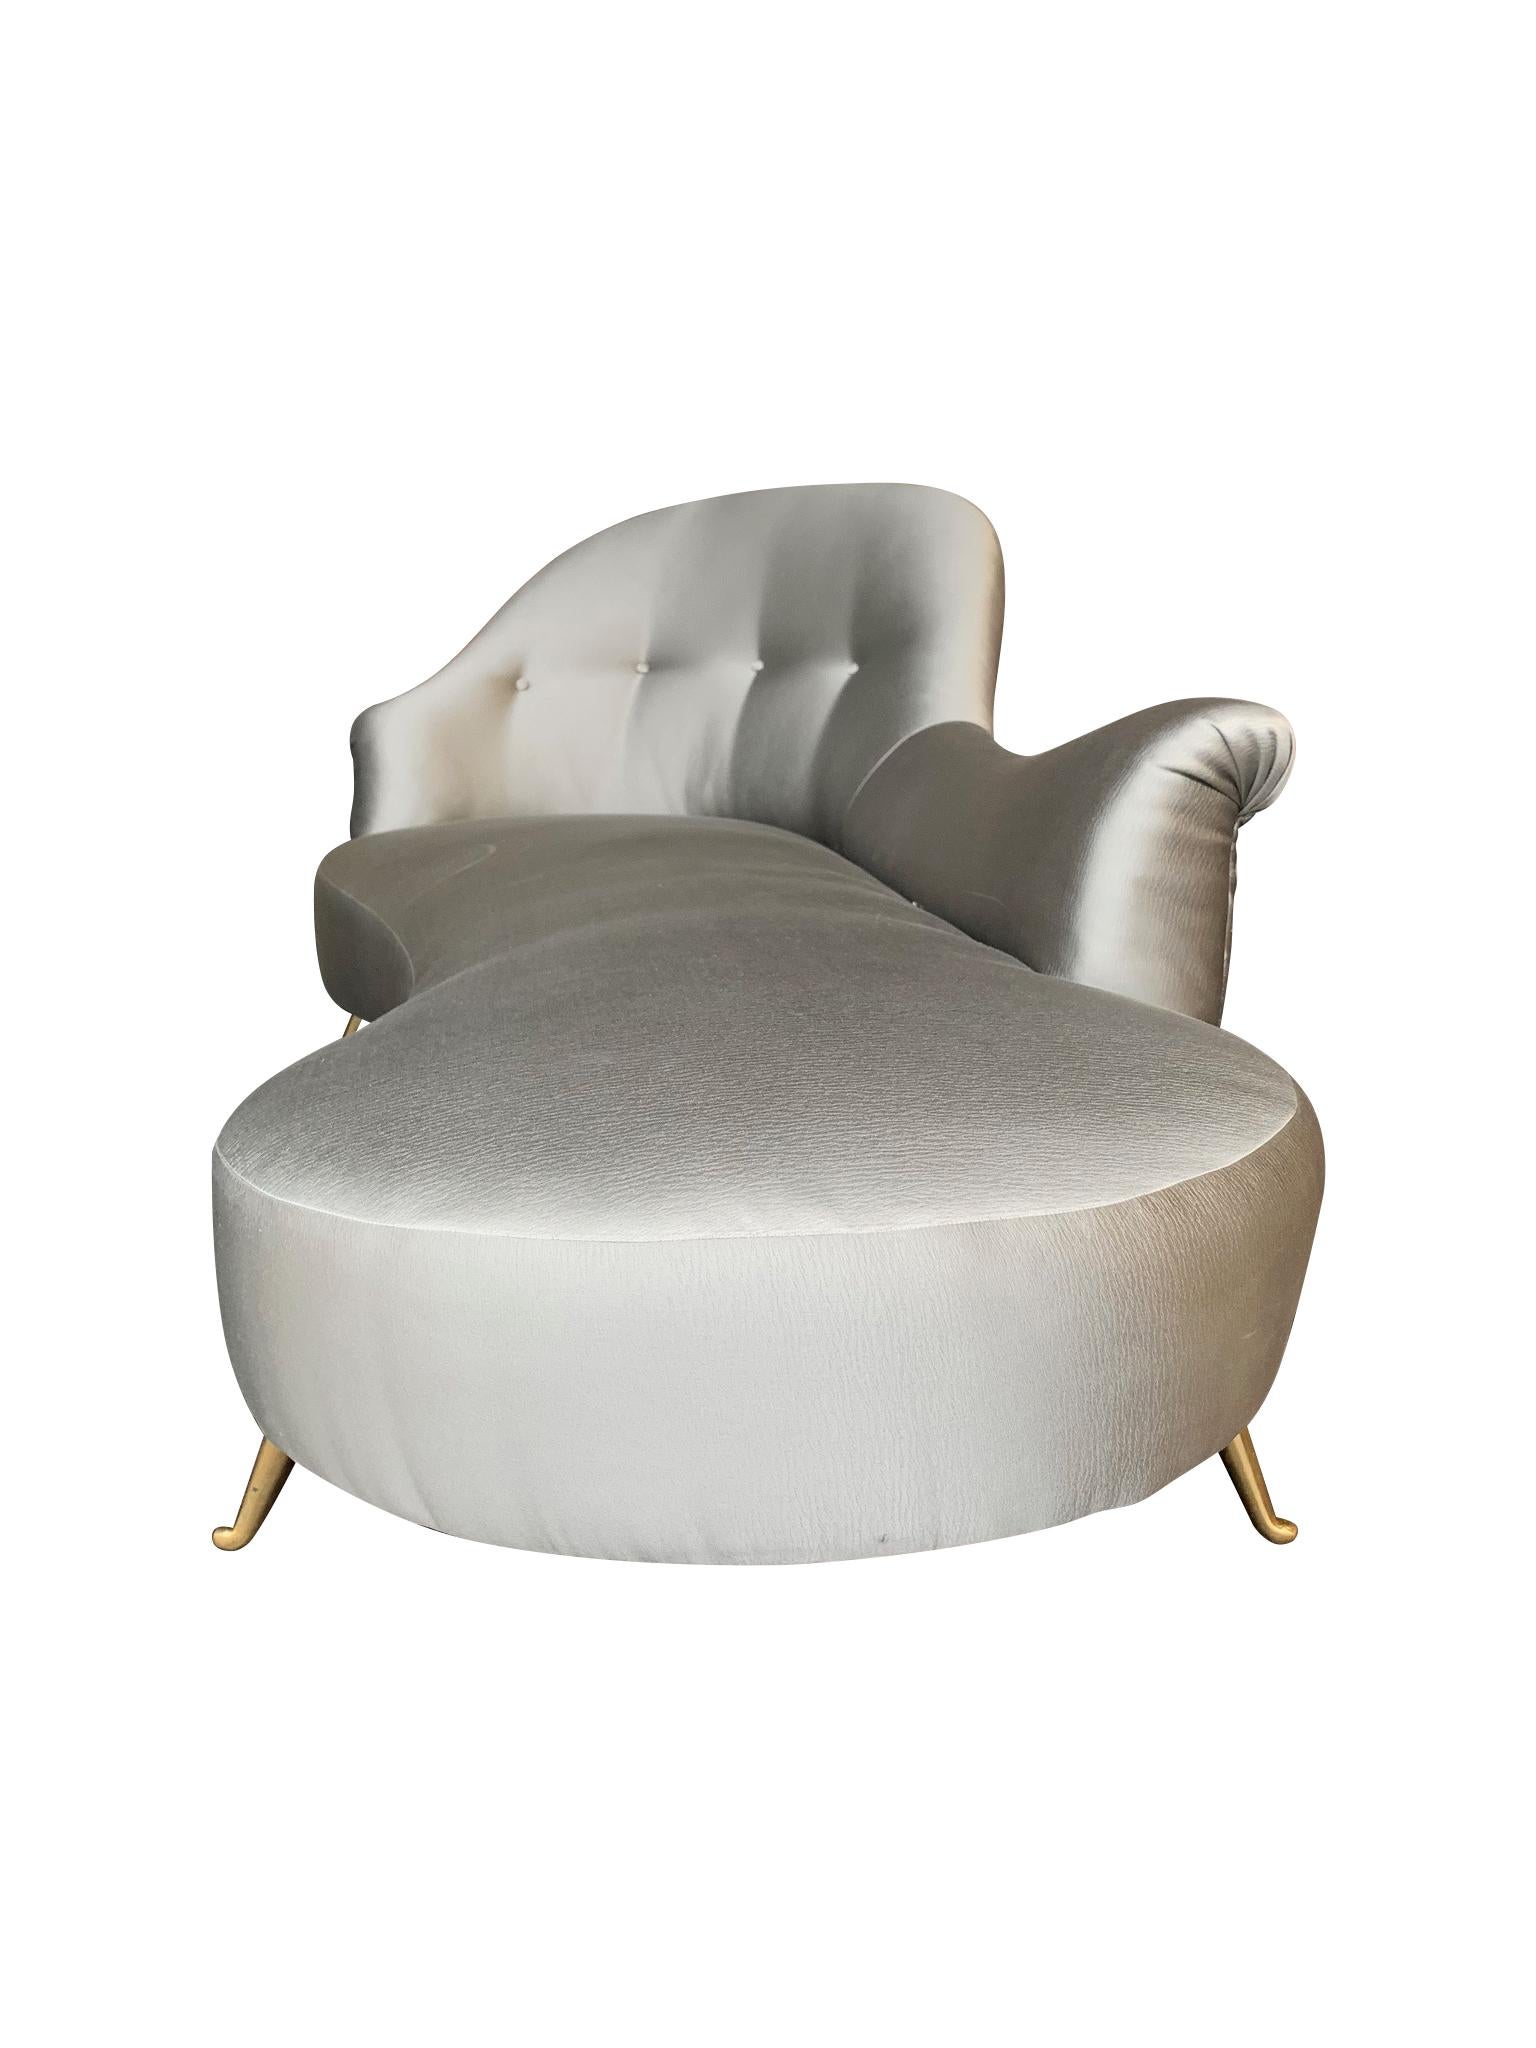 Italian Chaise Longue Upholstered in Silver Grey Fabric with Brass Feet 1